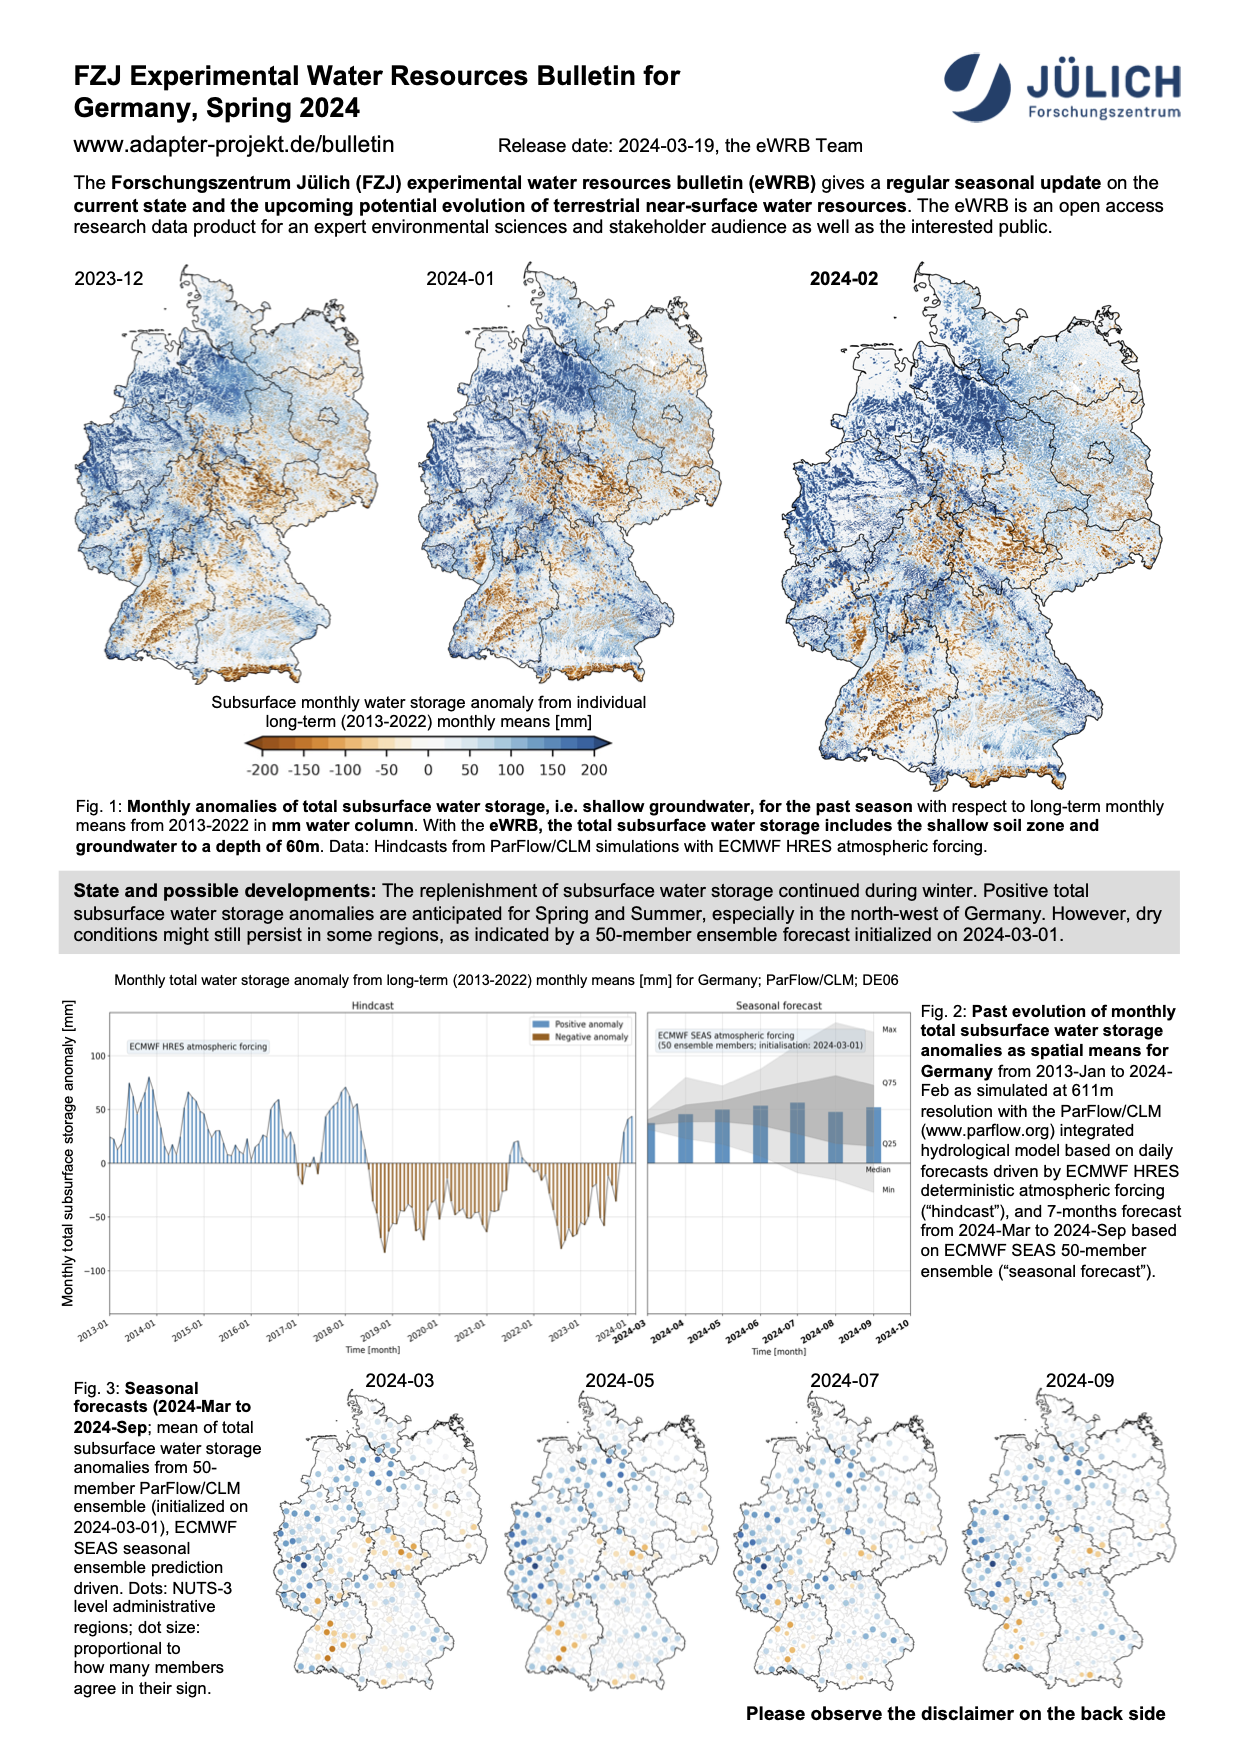 FZJ Experimental Water Resources Bulletin for Germany Spring 2024